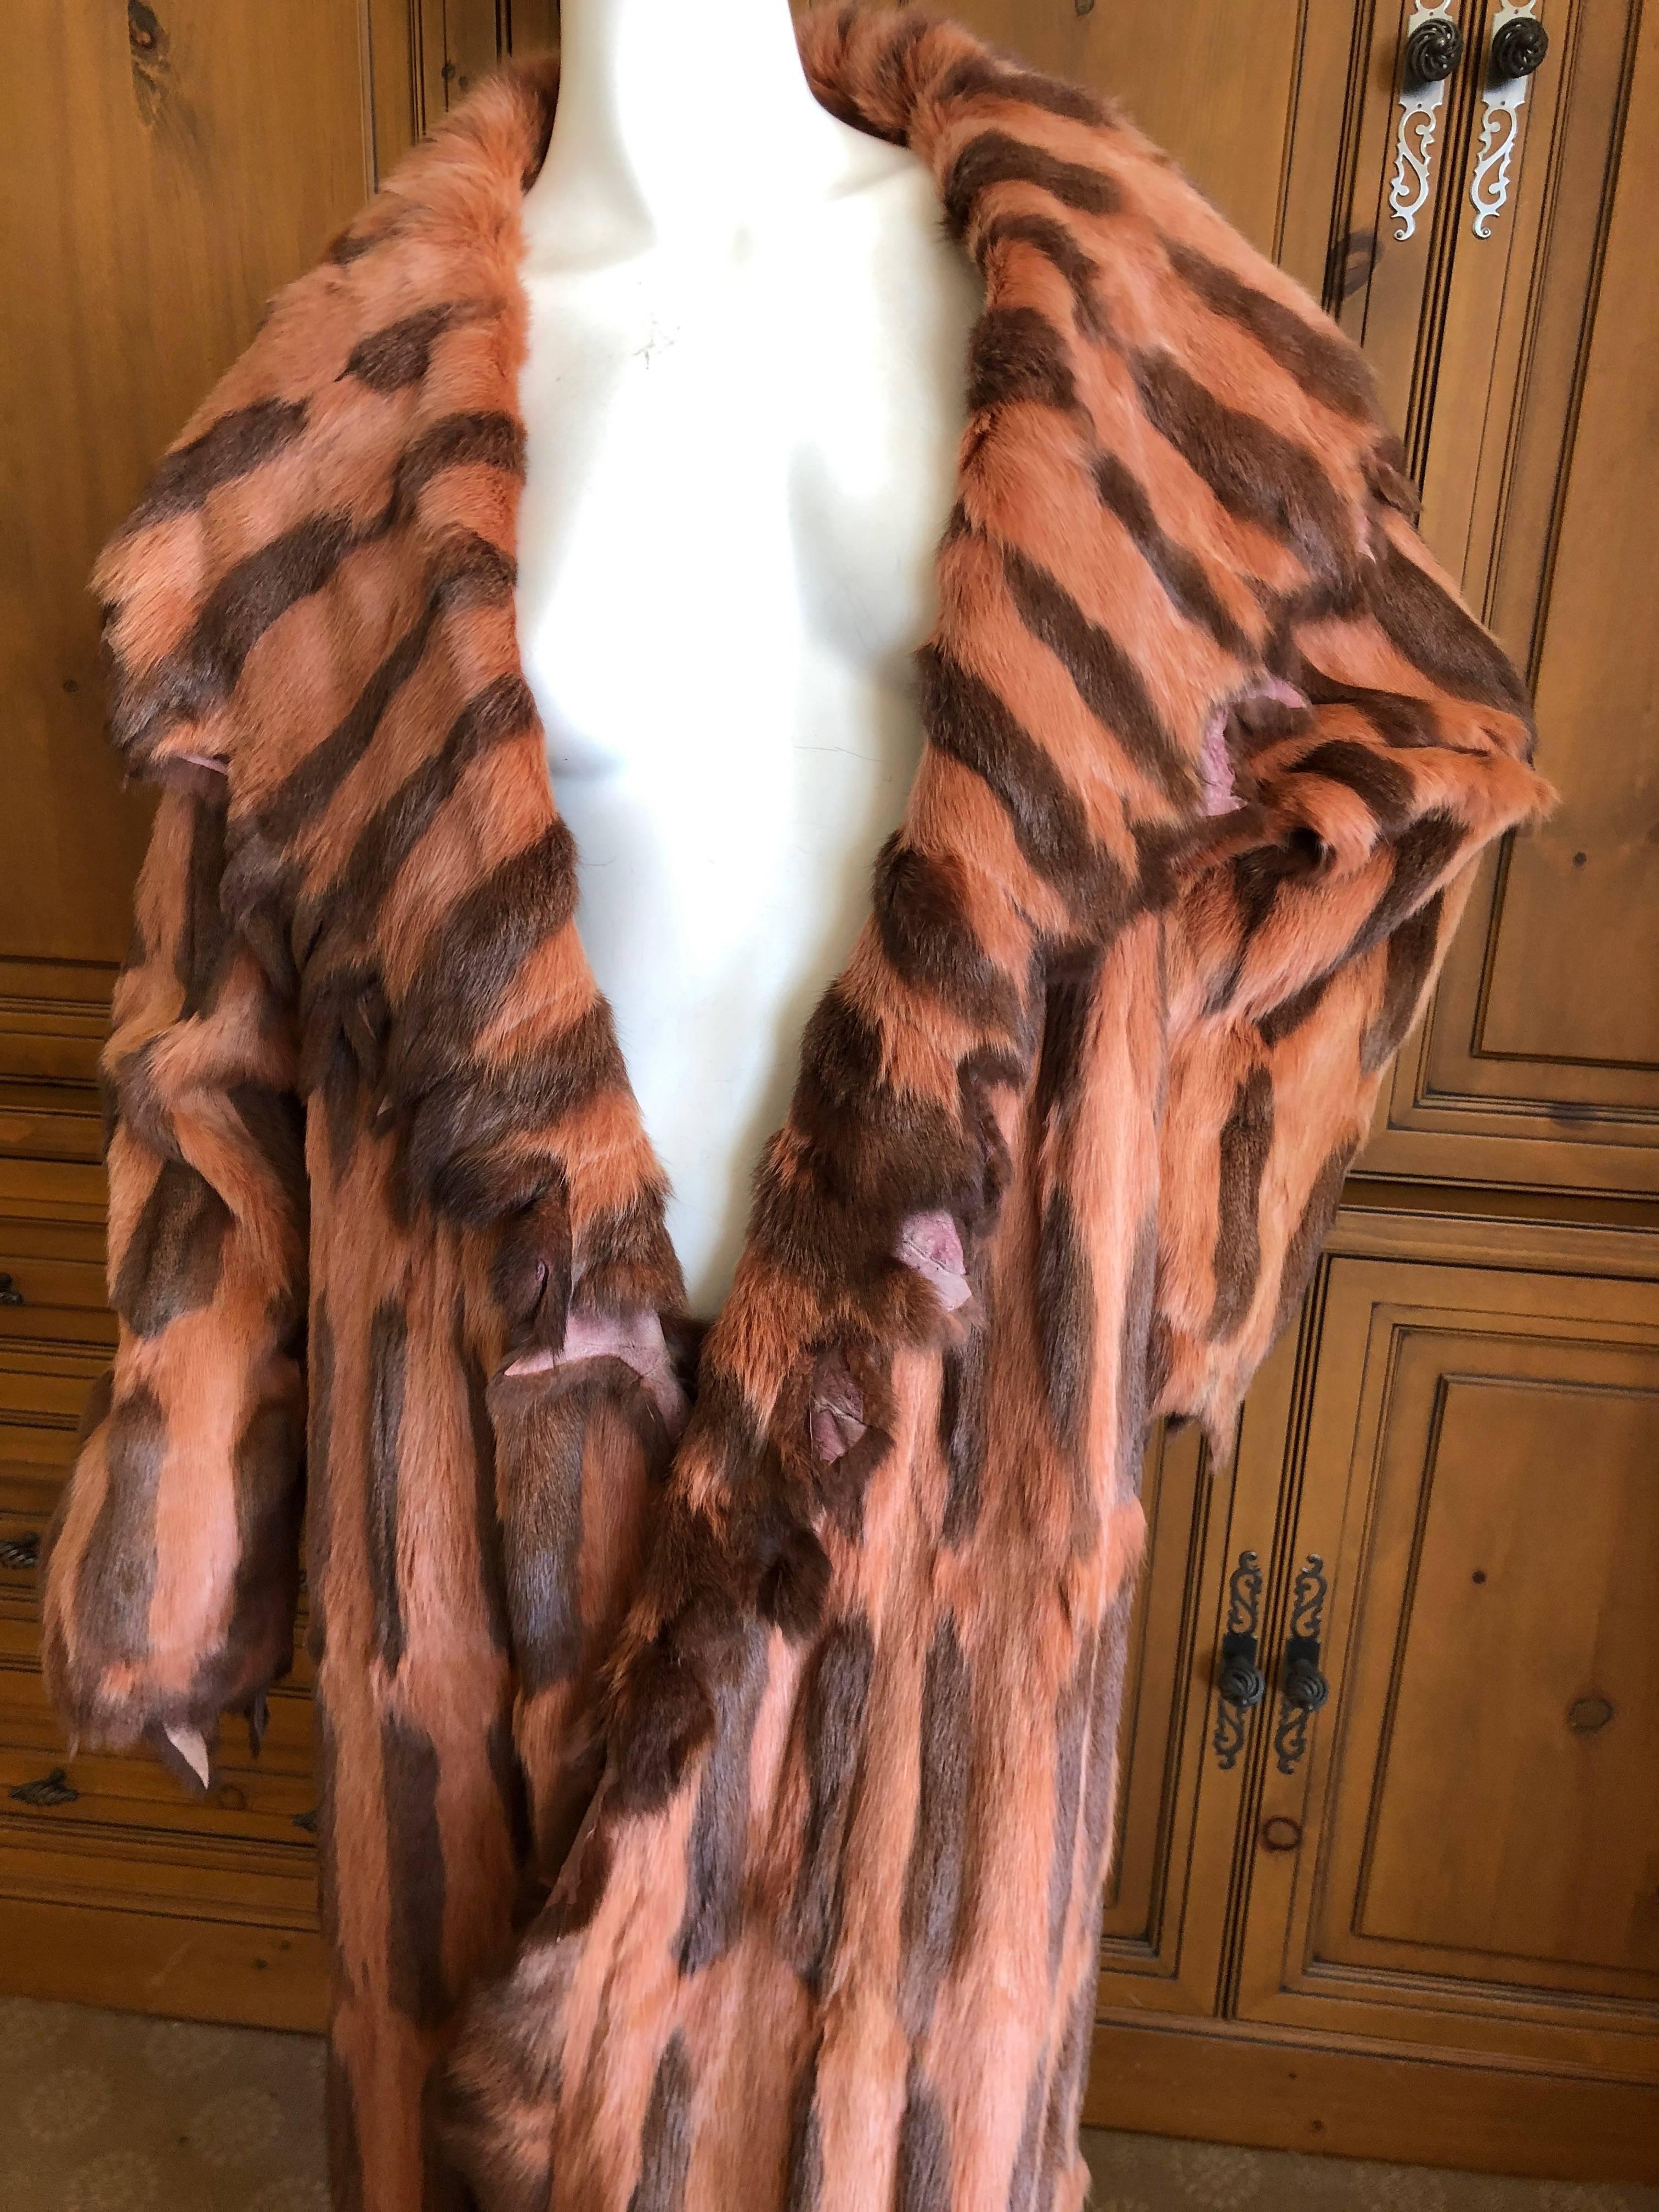 Fendi  Karl Lagerfeld 1980 Bonwit Teller Sawtooth Edge Floor Sweeping Fur Coat  In Excellent Condition In Cloverdale, CA